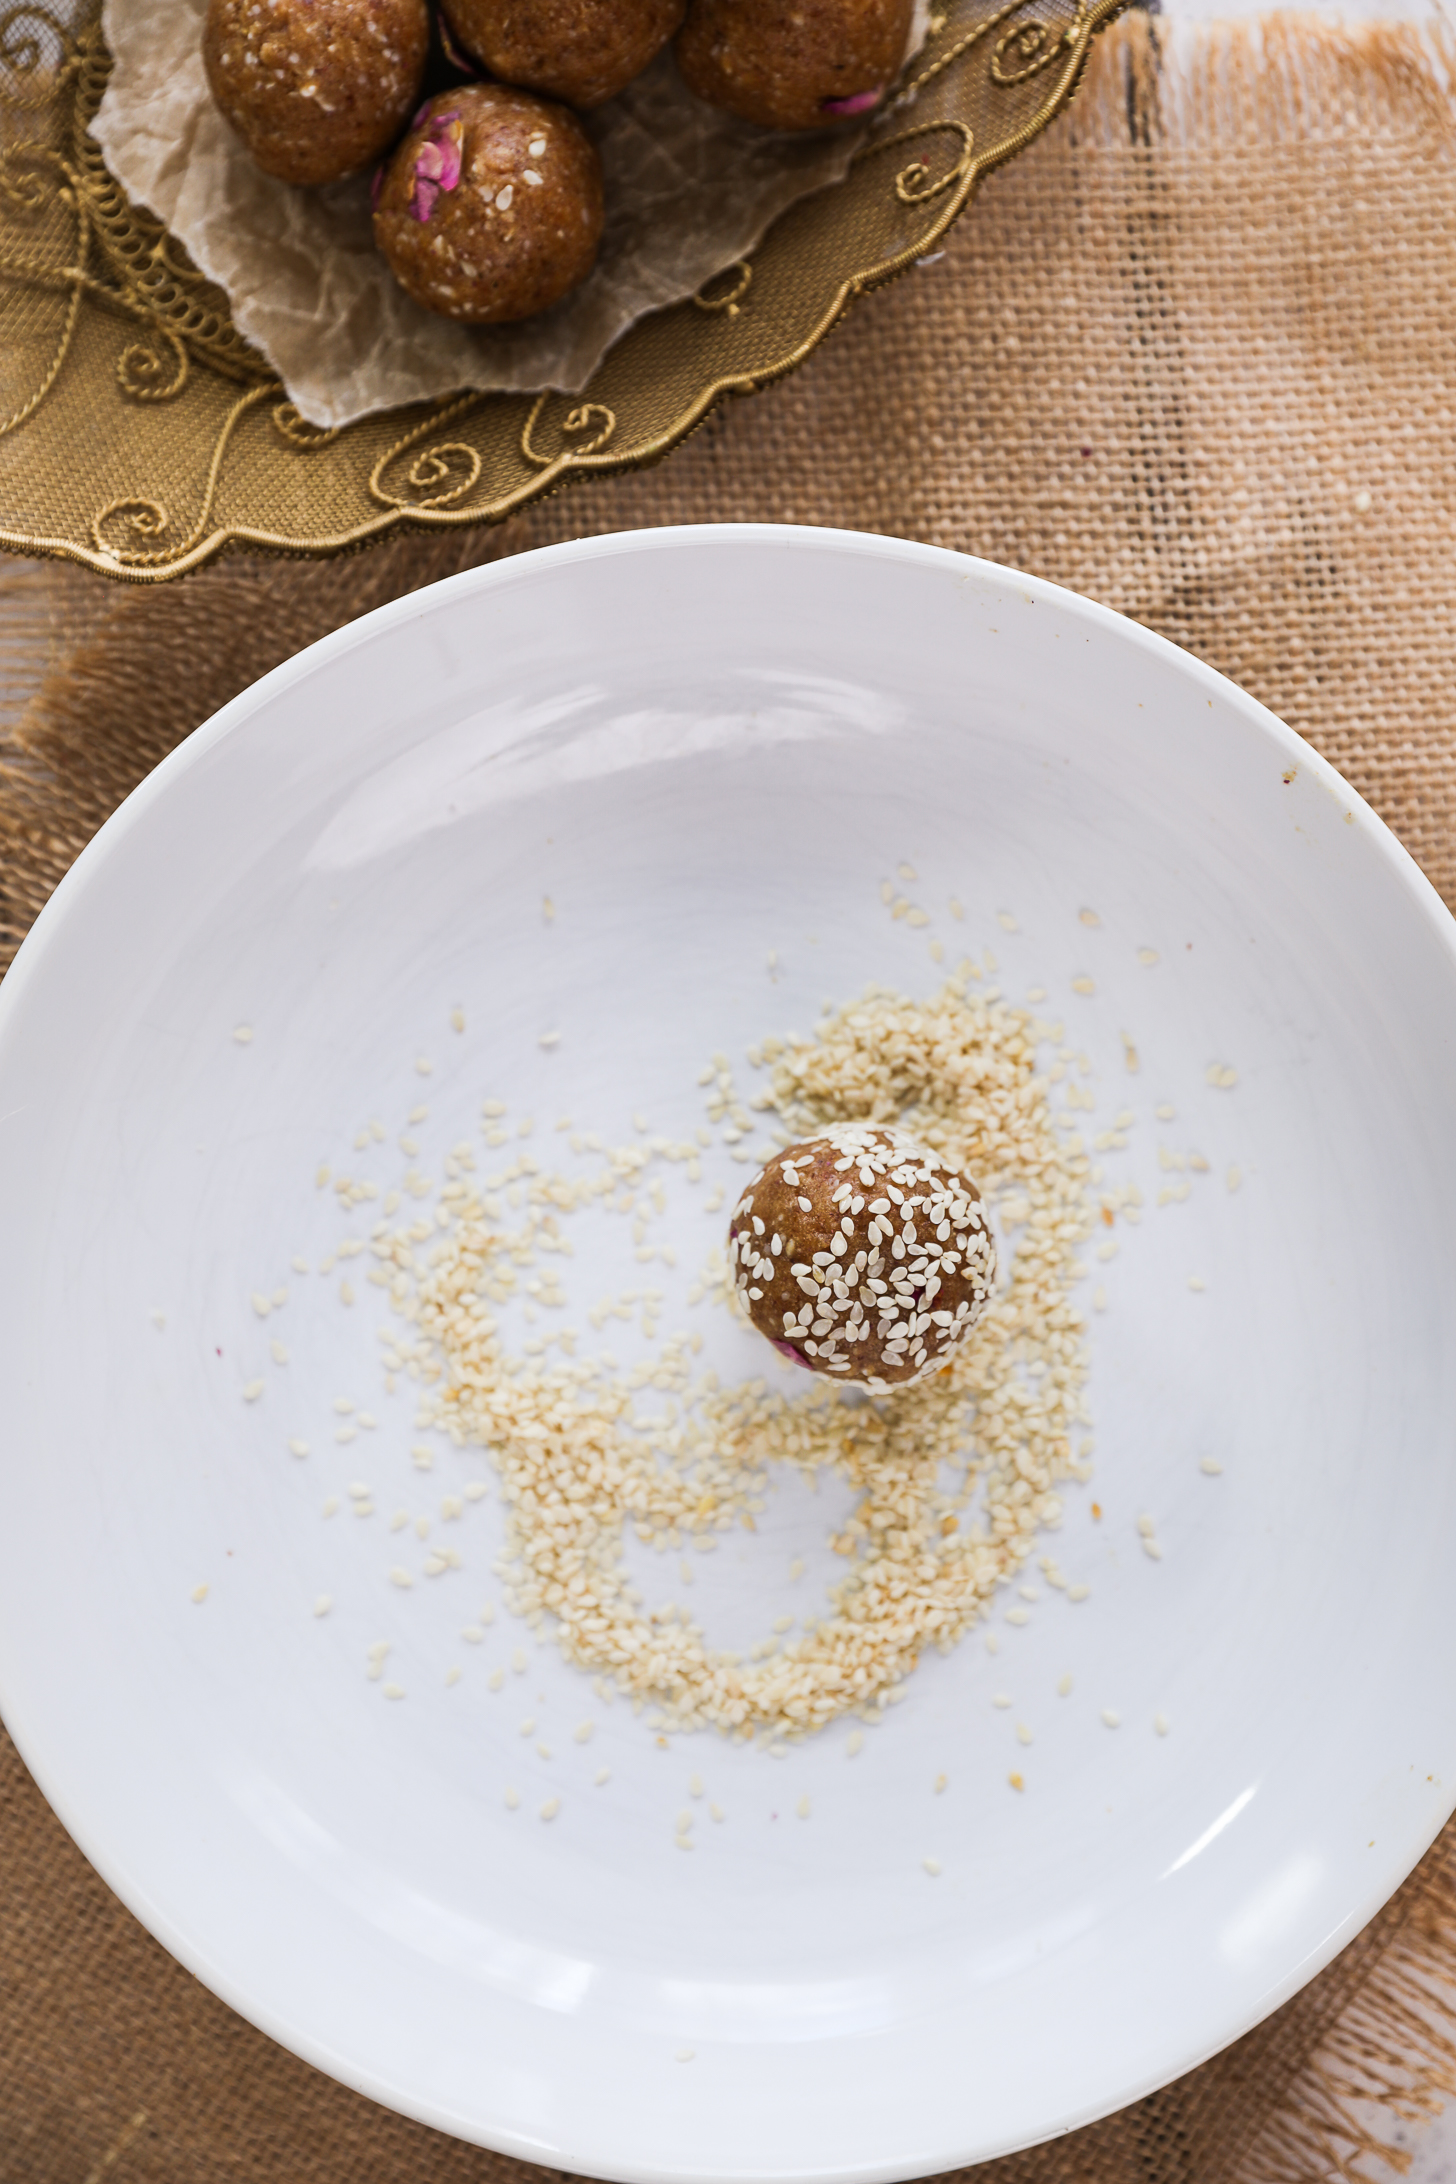 One sesame-coated brown bliss ball nestled among sesame seeds on a white plate.